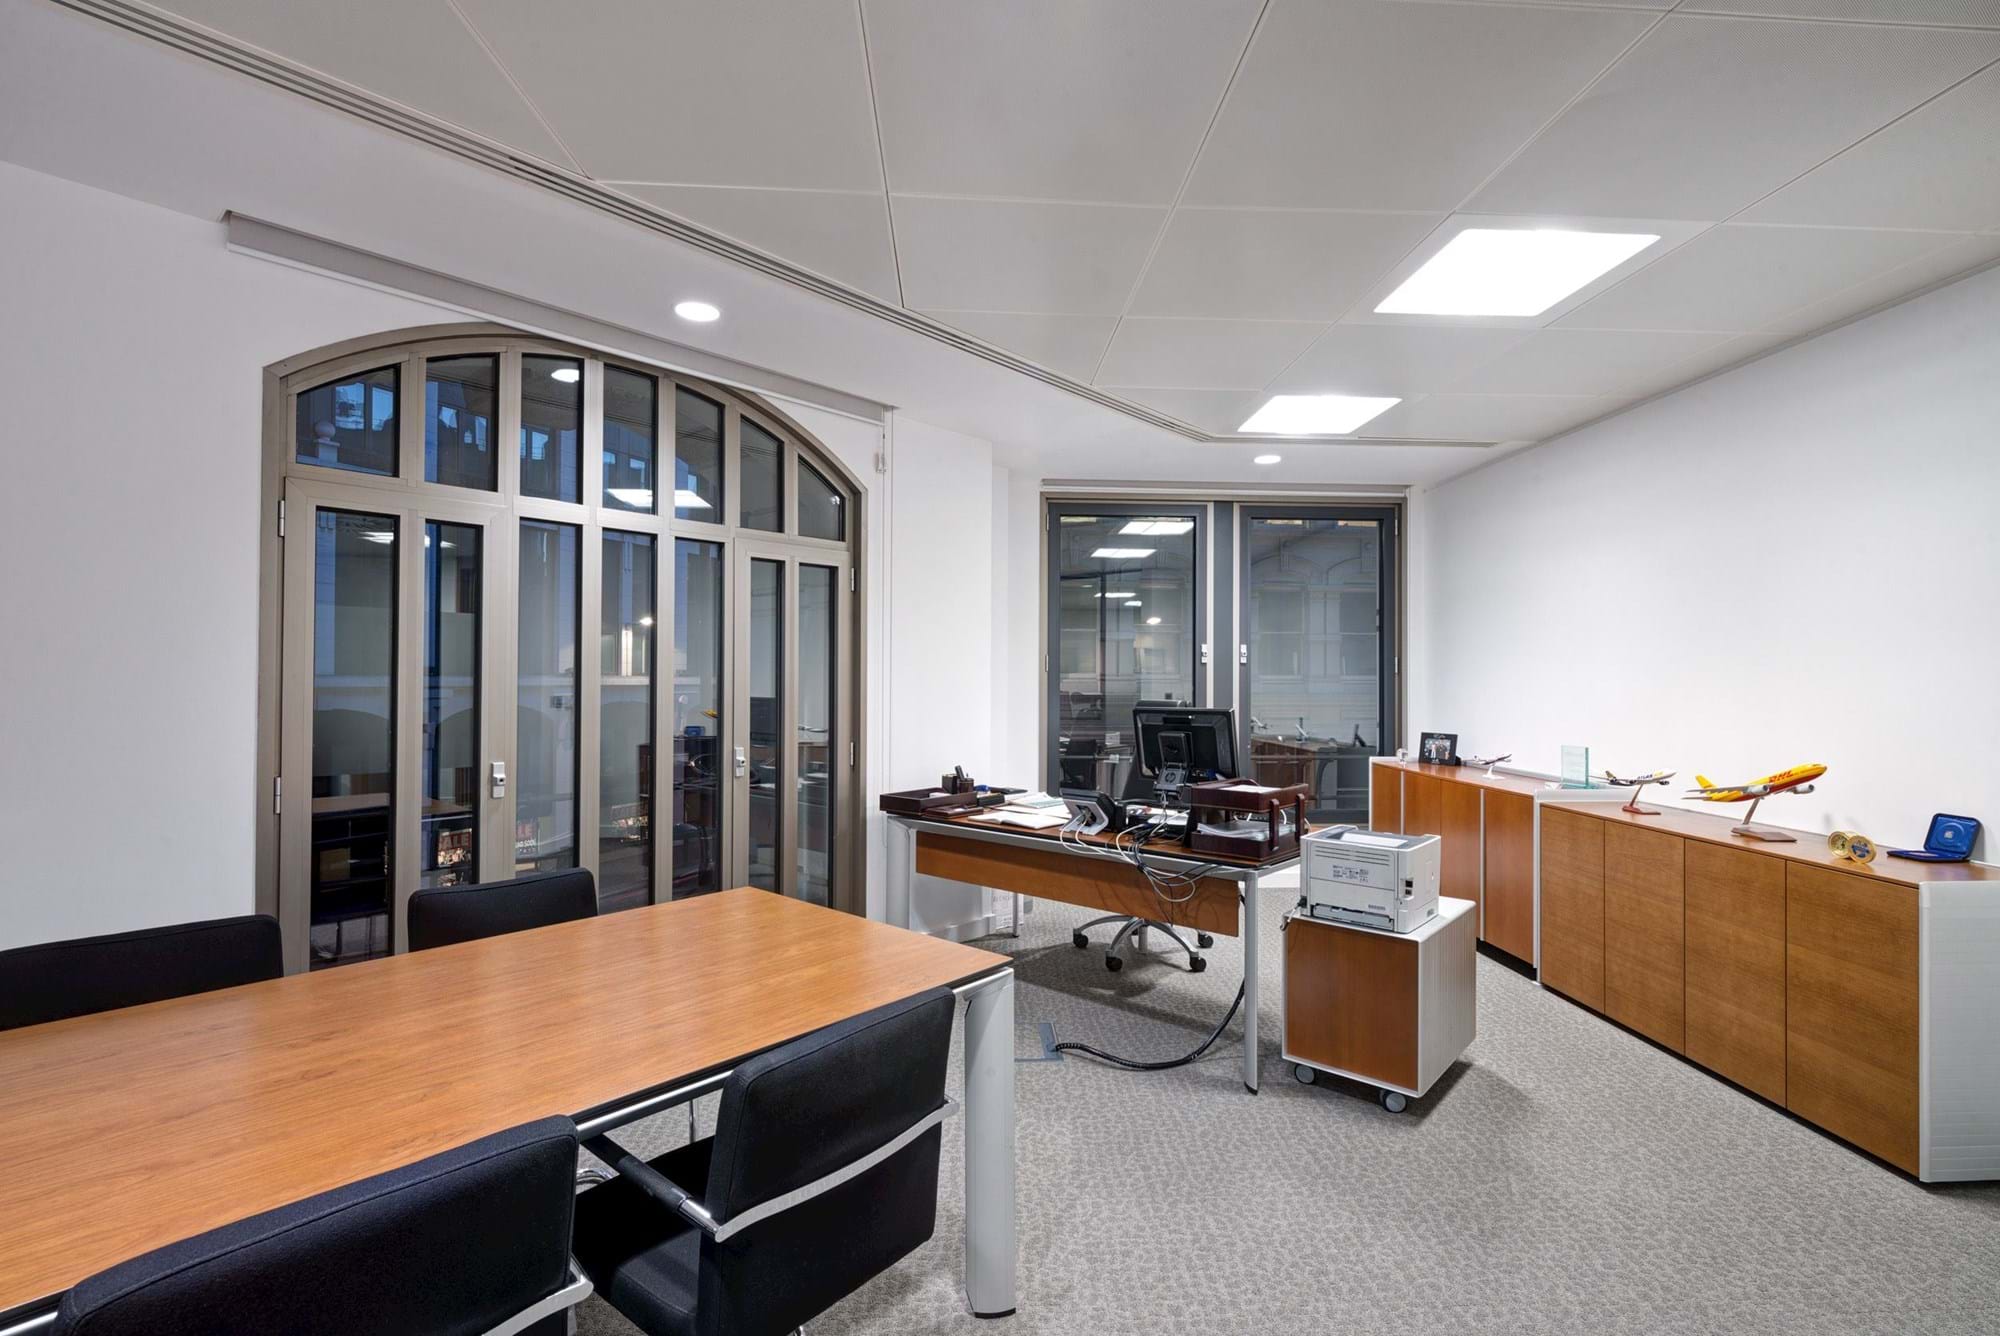 Modus Workspace office design, fit out and refurbishment - DPDHL - Open Plan Office - DHL 07 highres sRGB.jpg